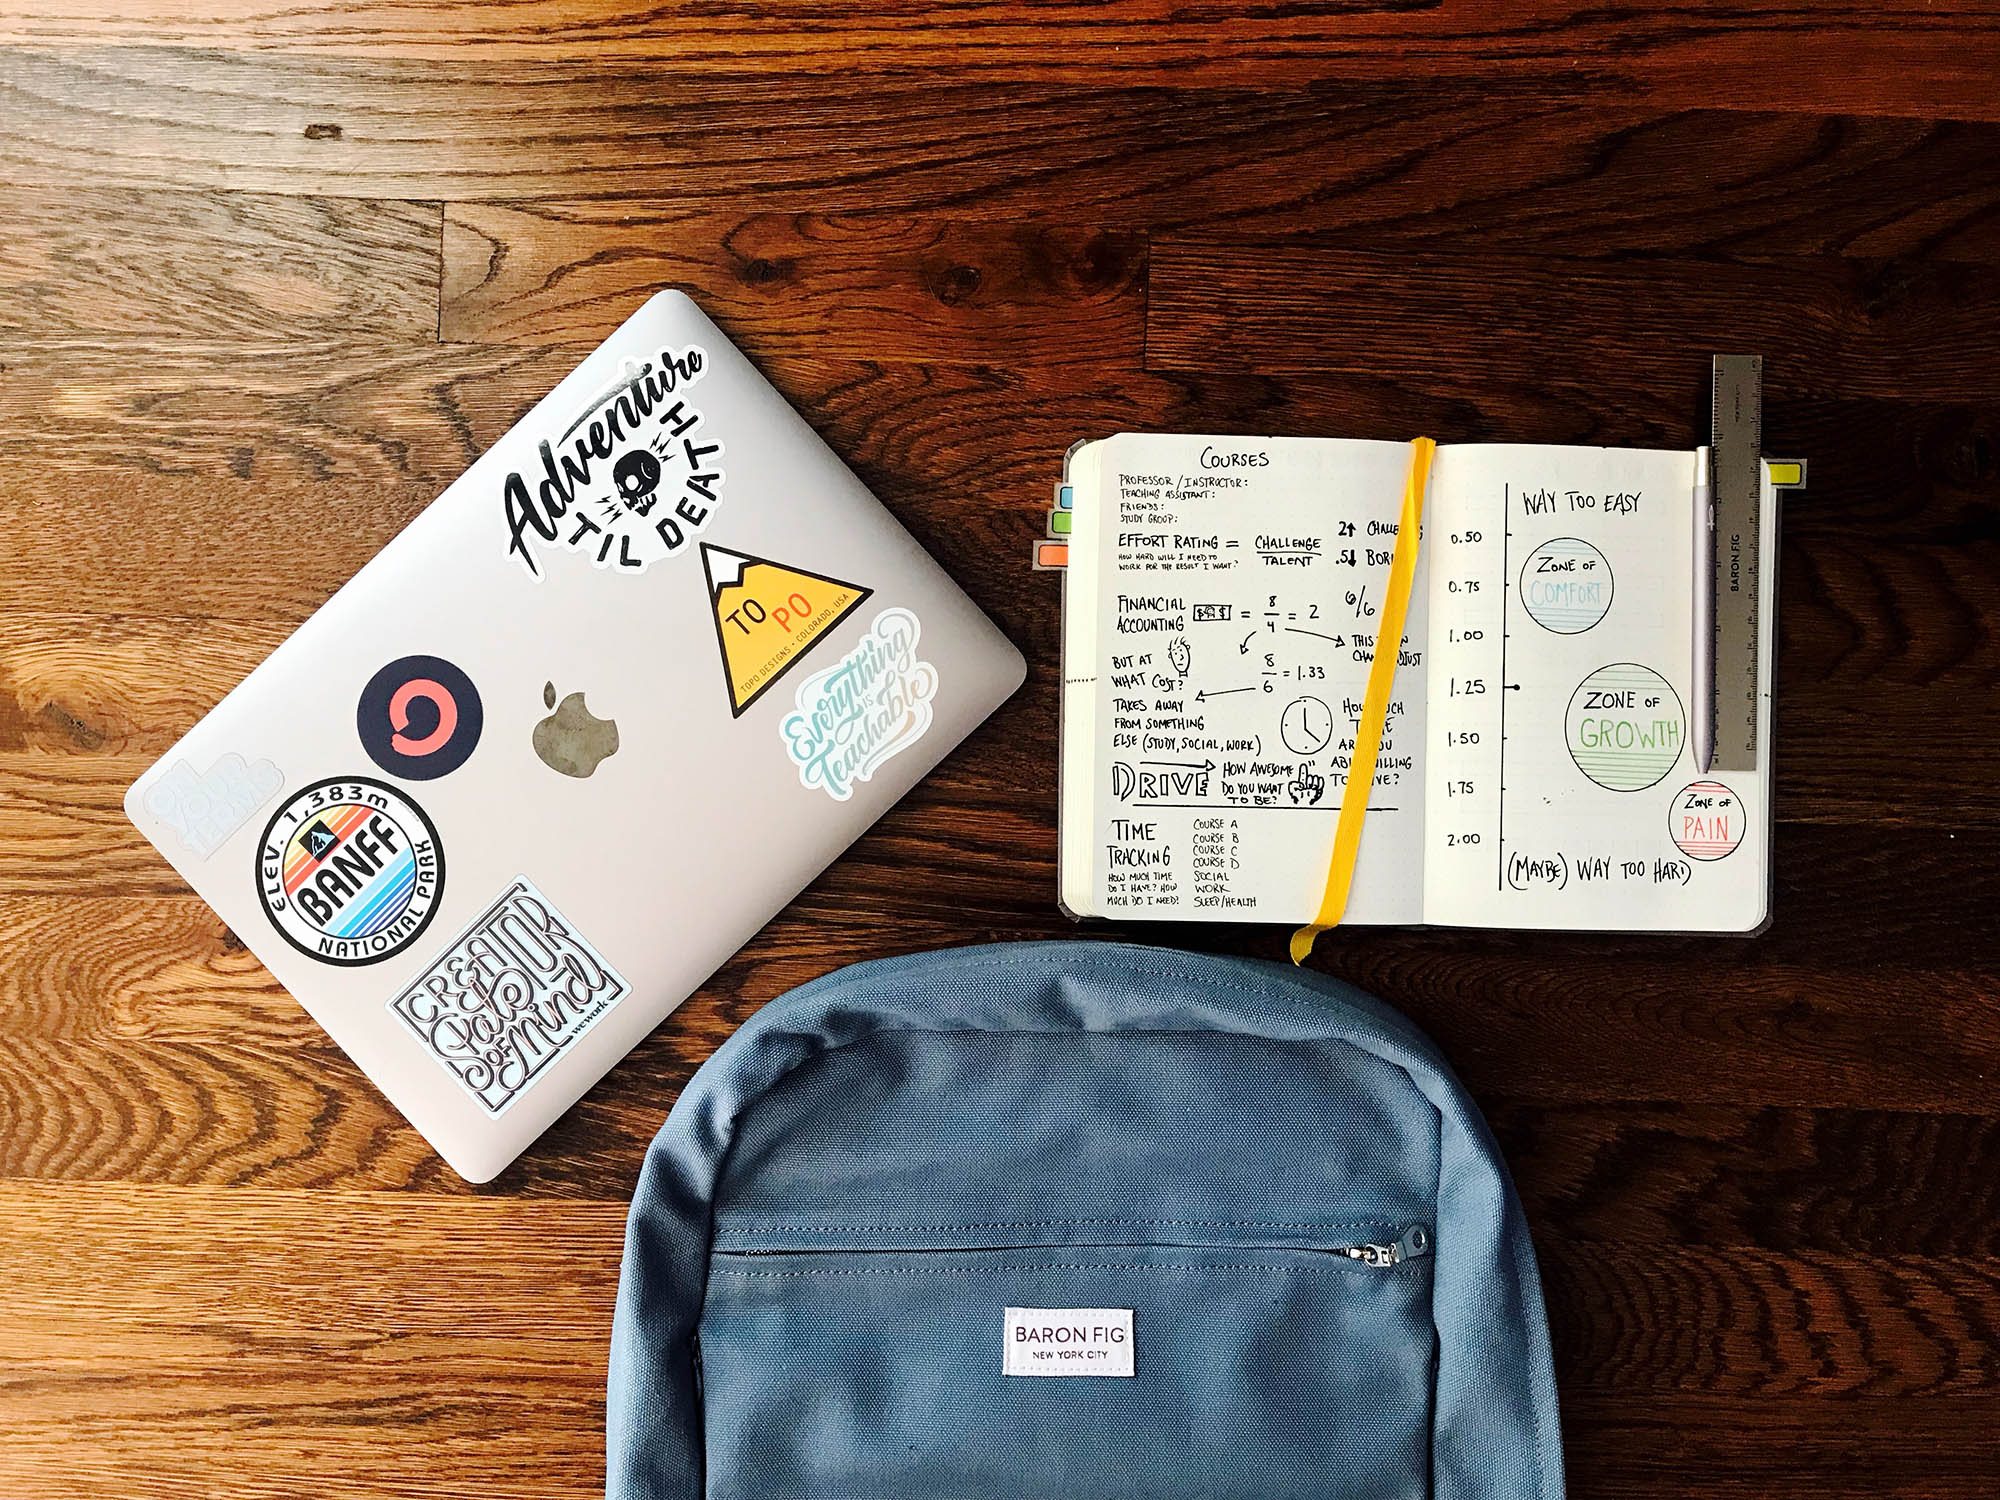 Laptop, journal and backpack - how to write a travel journal article